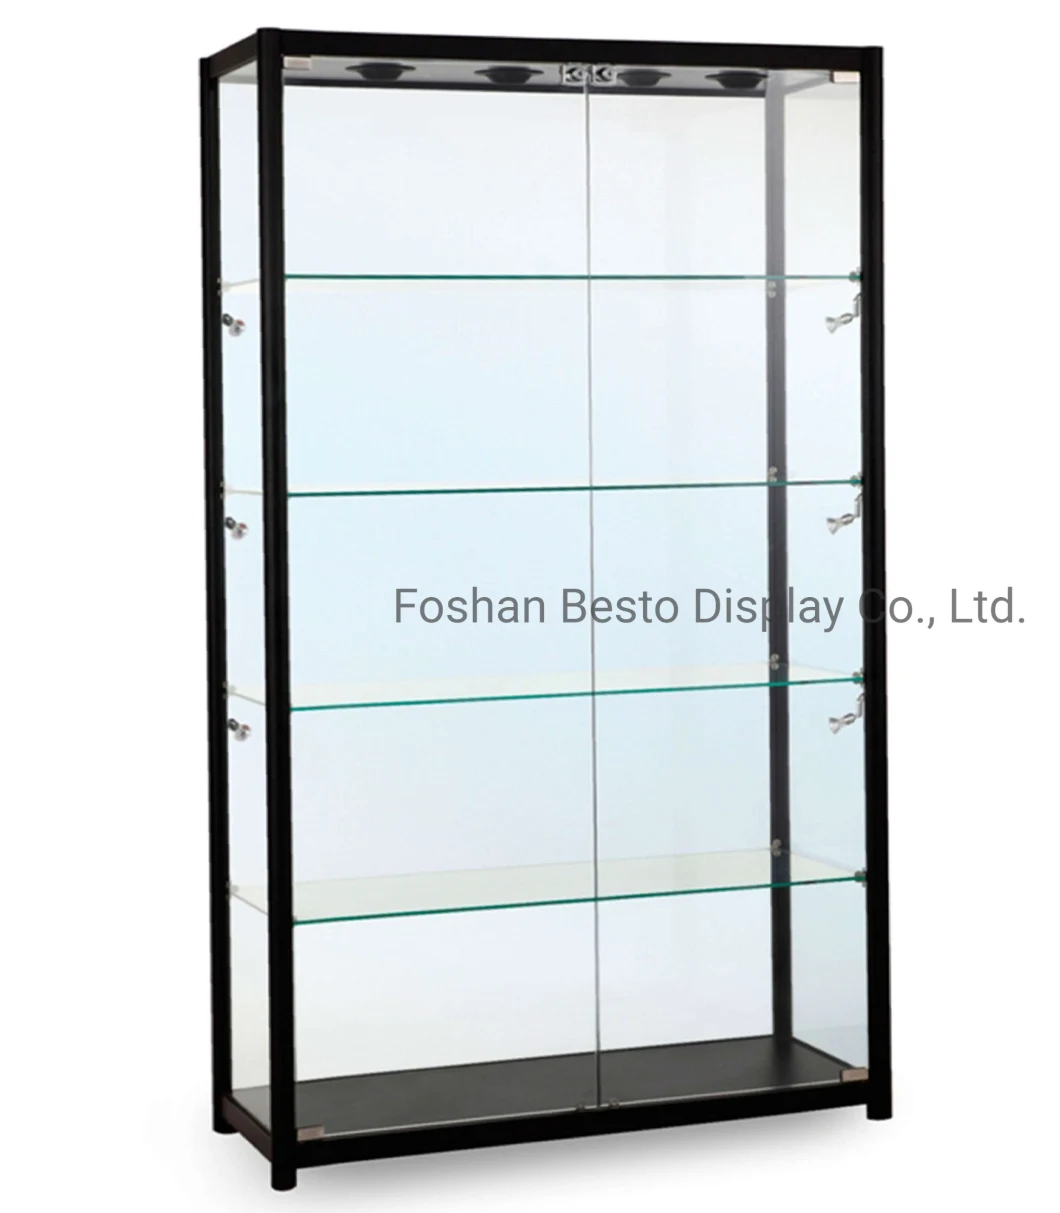 China Retail Display Wholesale Glass Display Case for House Collection, Retail Store Display, Shops Storage with Door to Door Price